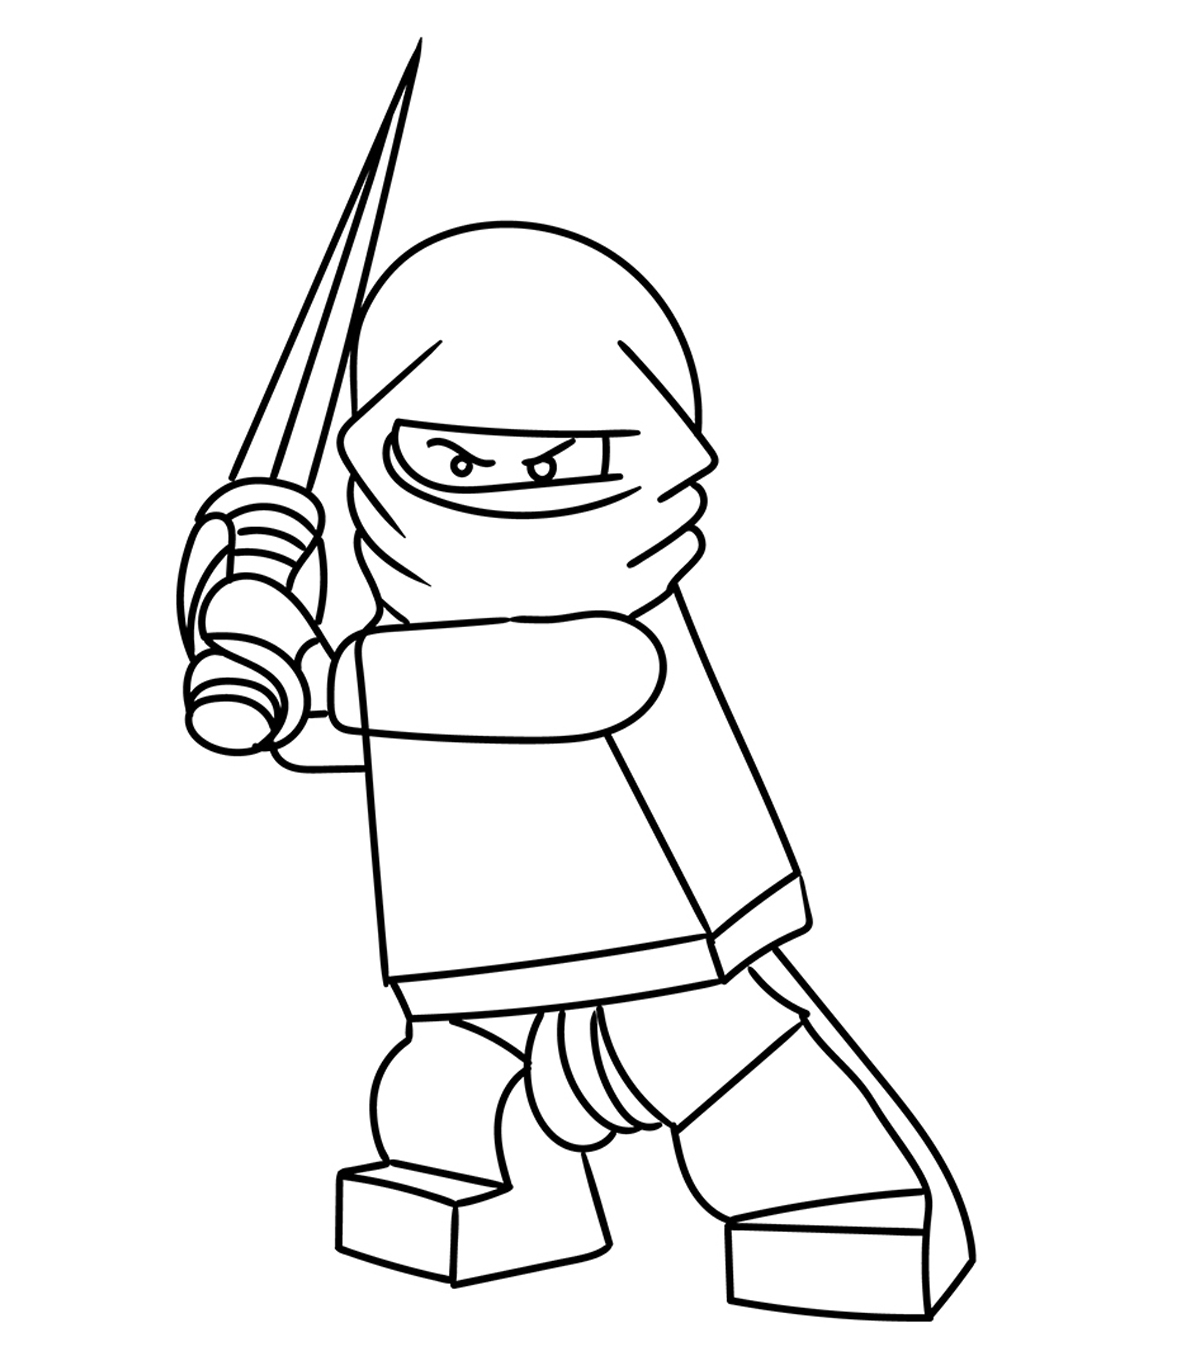 Top 20 Free Printable Ninja Coloring Pages Online - roblox coloring pages for kids educative printable